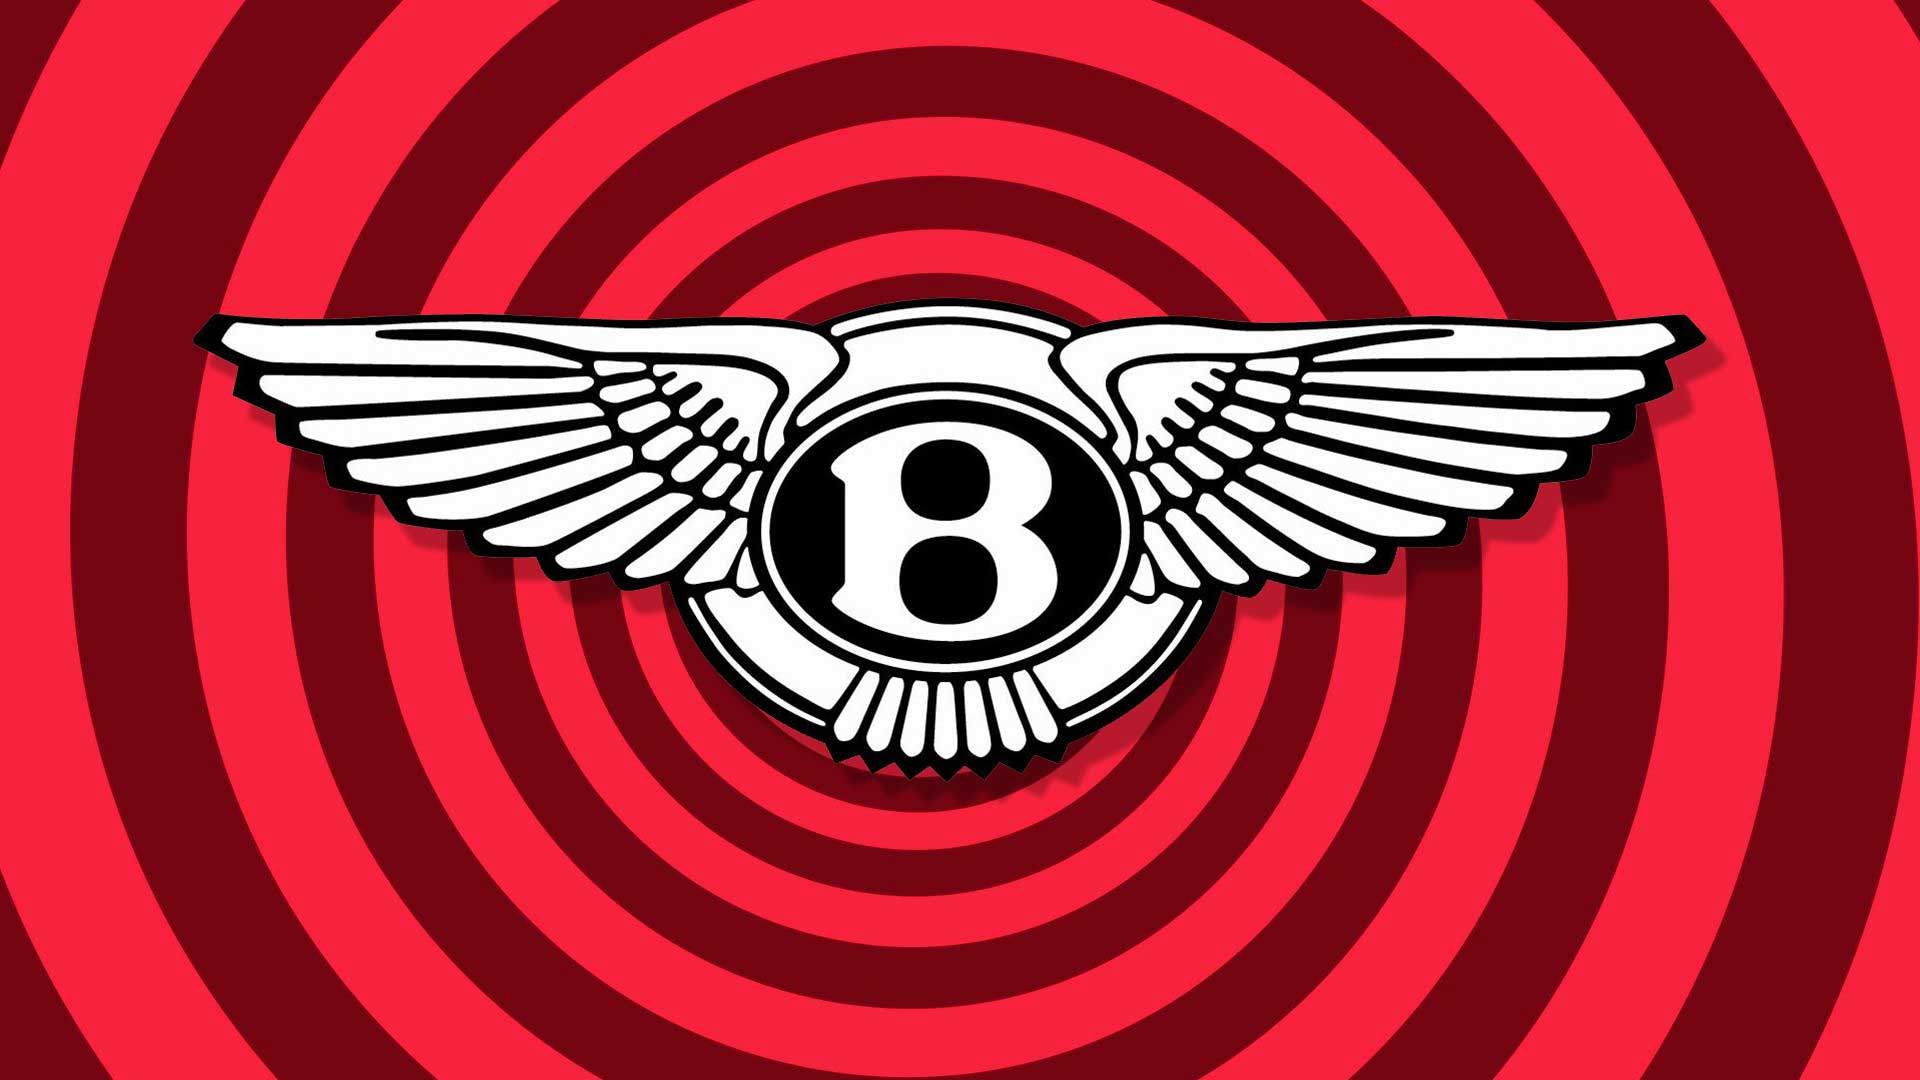 A car logo with a B and wings